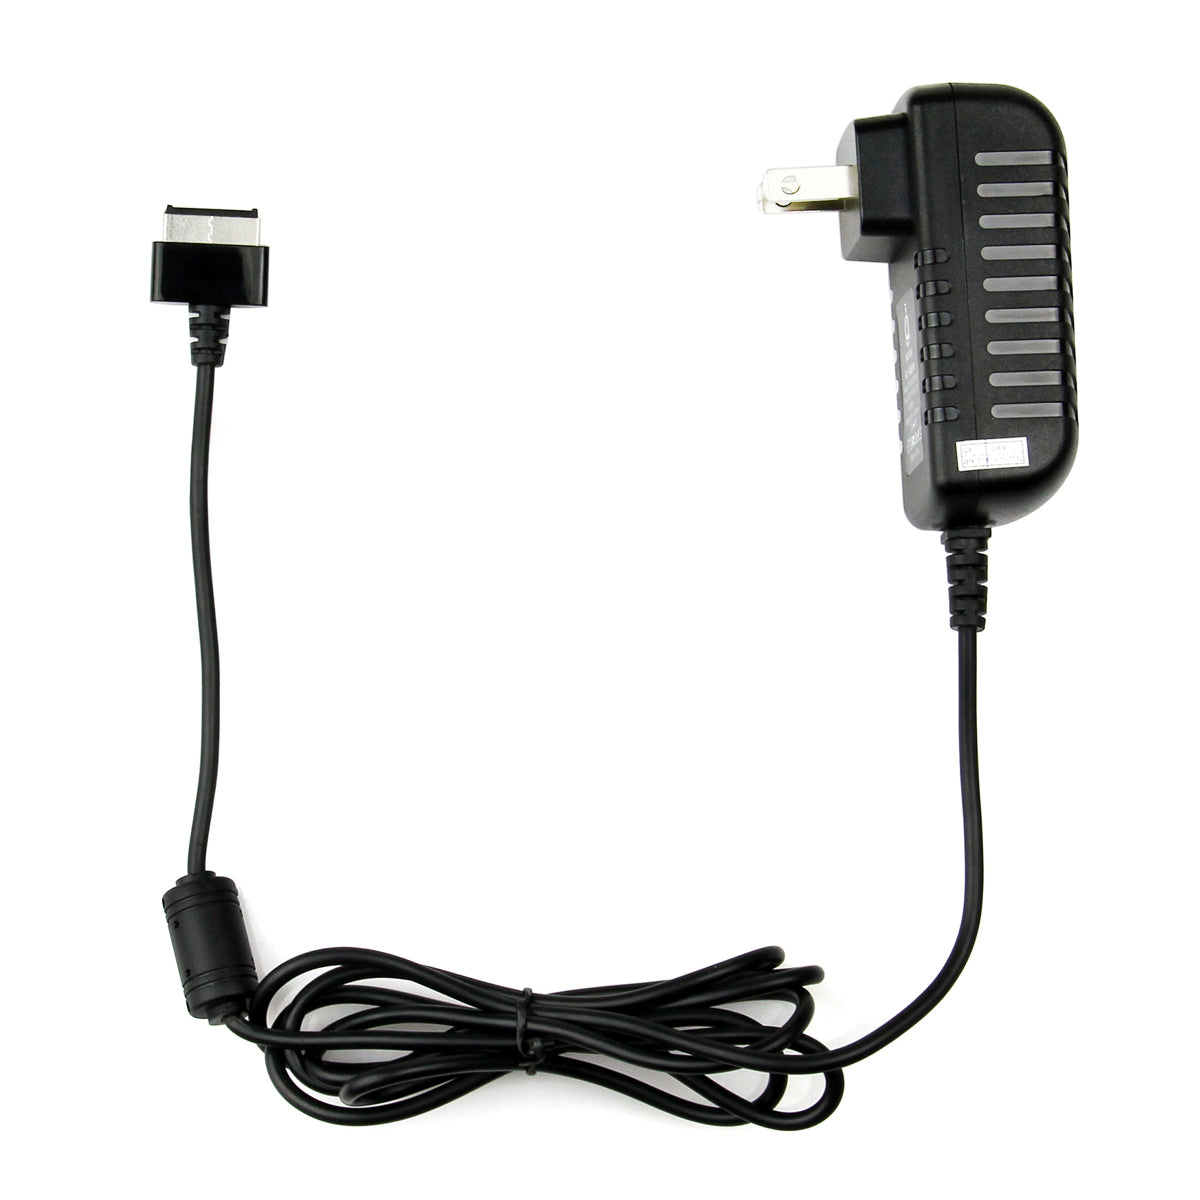 AC Adapter Charger for ASUS TF101RF-A1 Tablet.